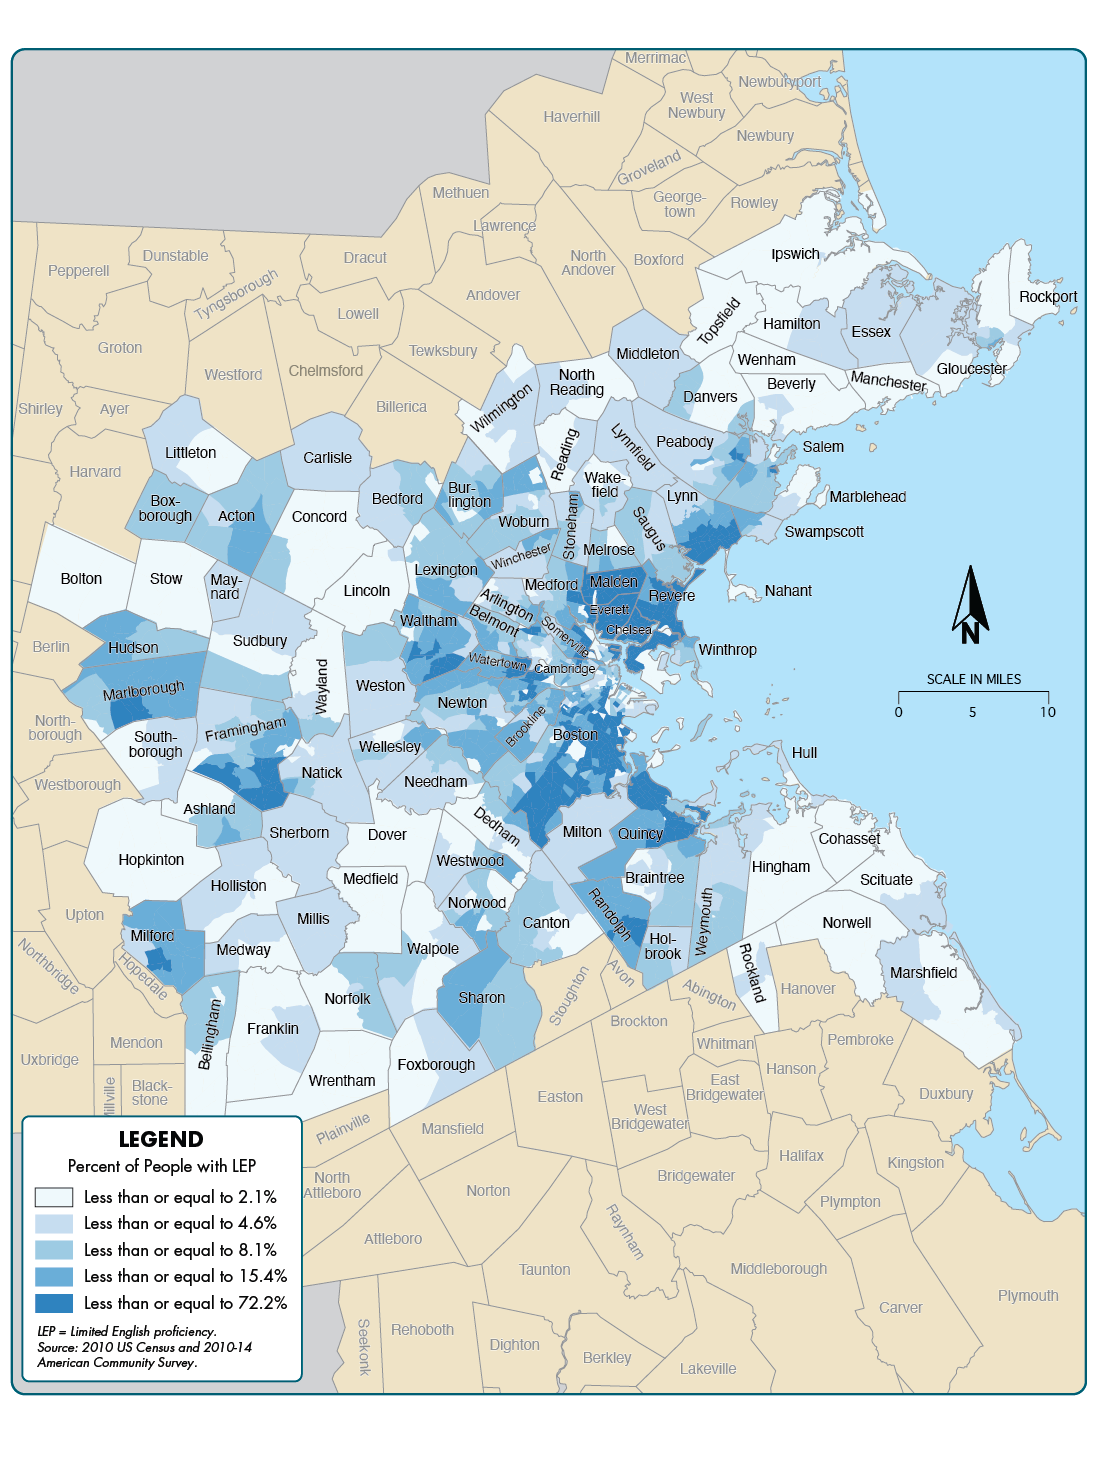 Figure 6-3 is a map showing the percent of the population that has limited English proficiency across the 97 communities in the Boston region.